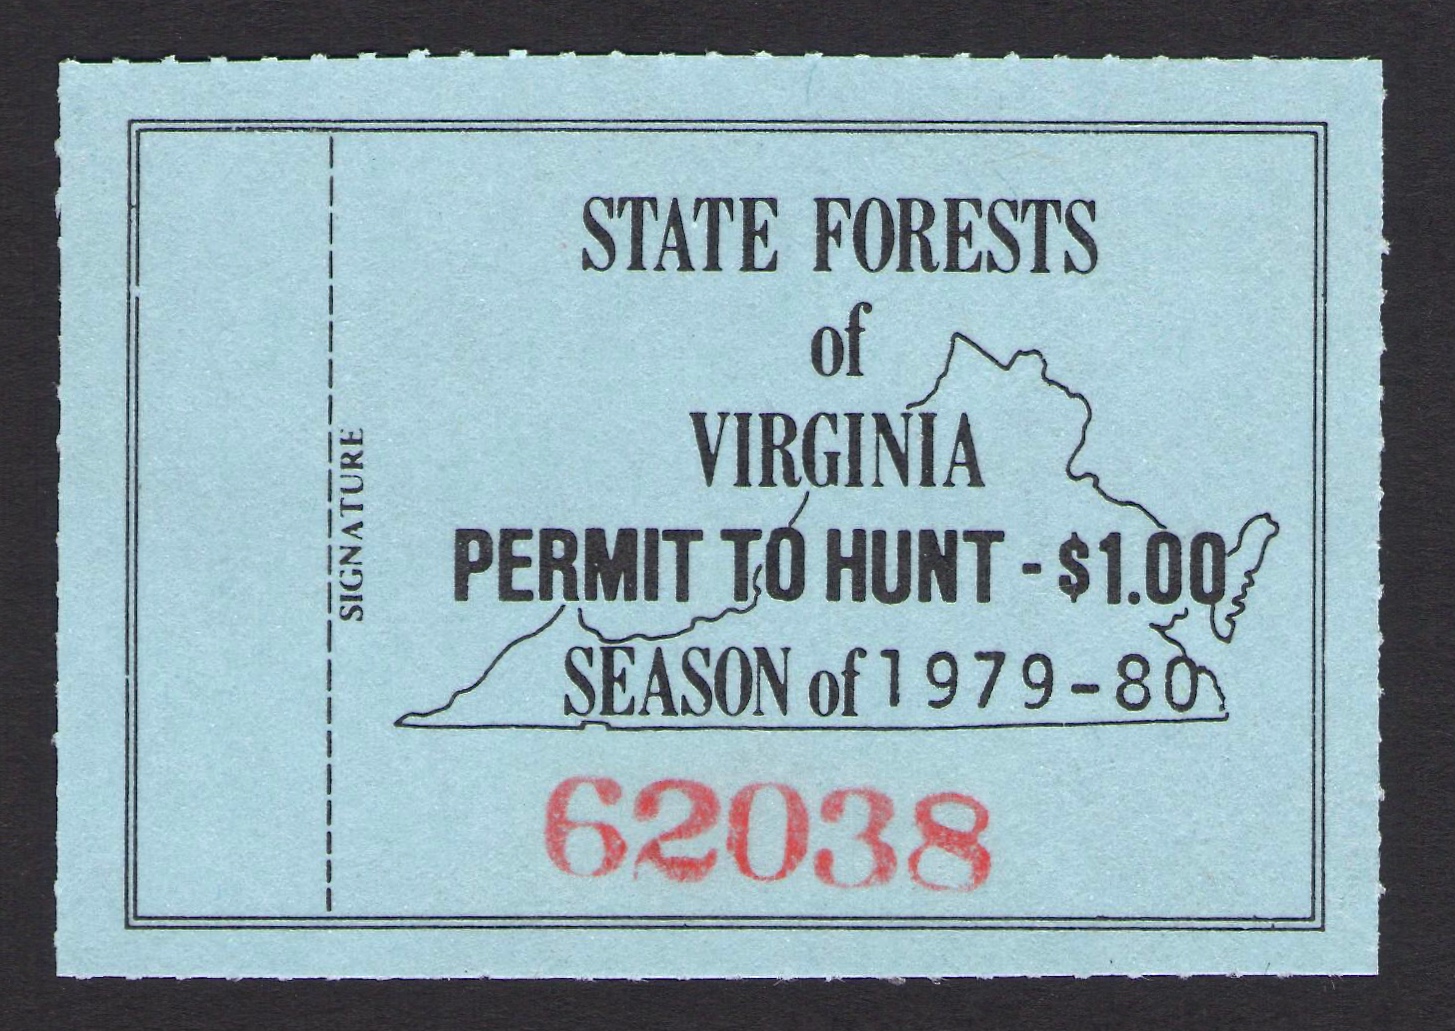 1979-80 Virginia State Forest